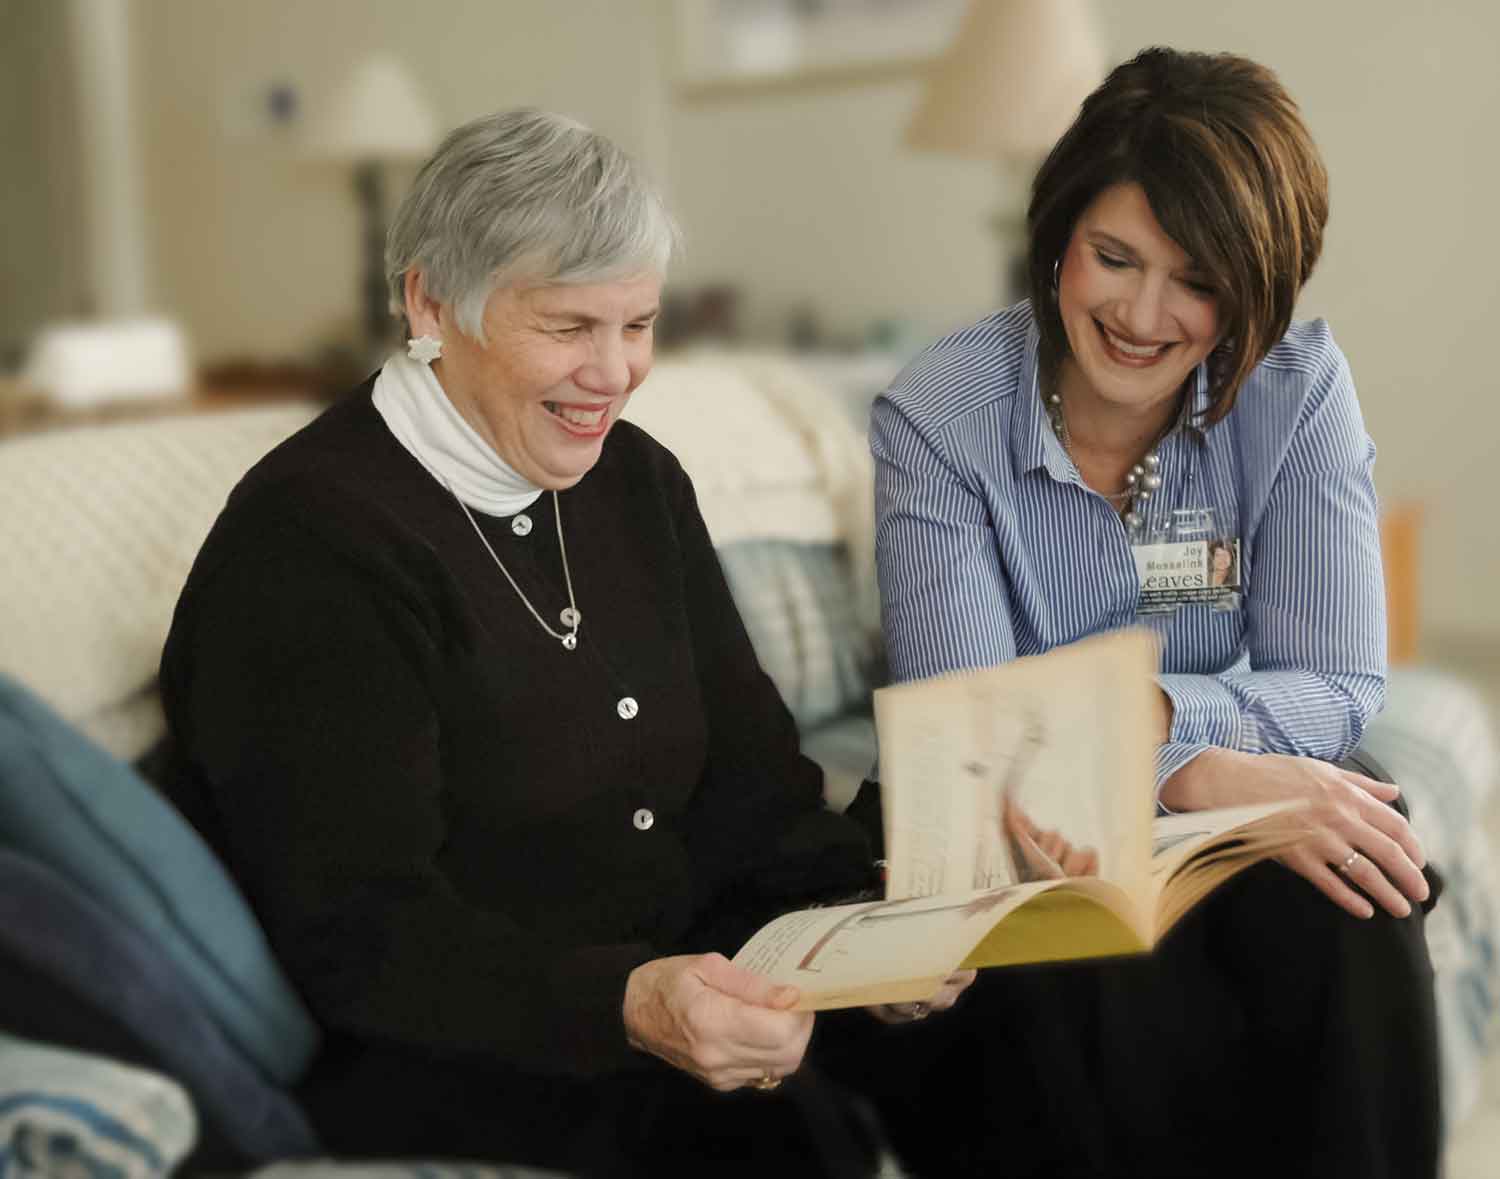 Leaves Personal Care: In-Home Health Care Services for Seniors